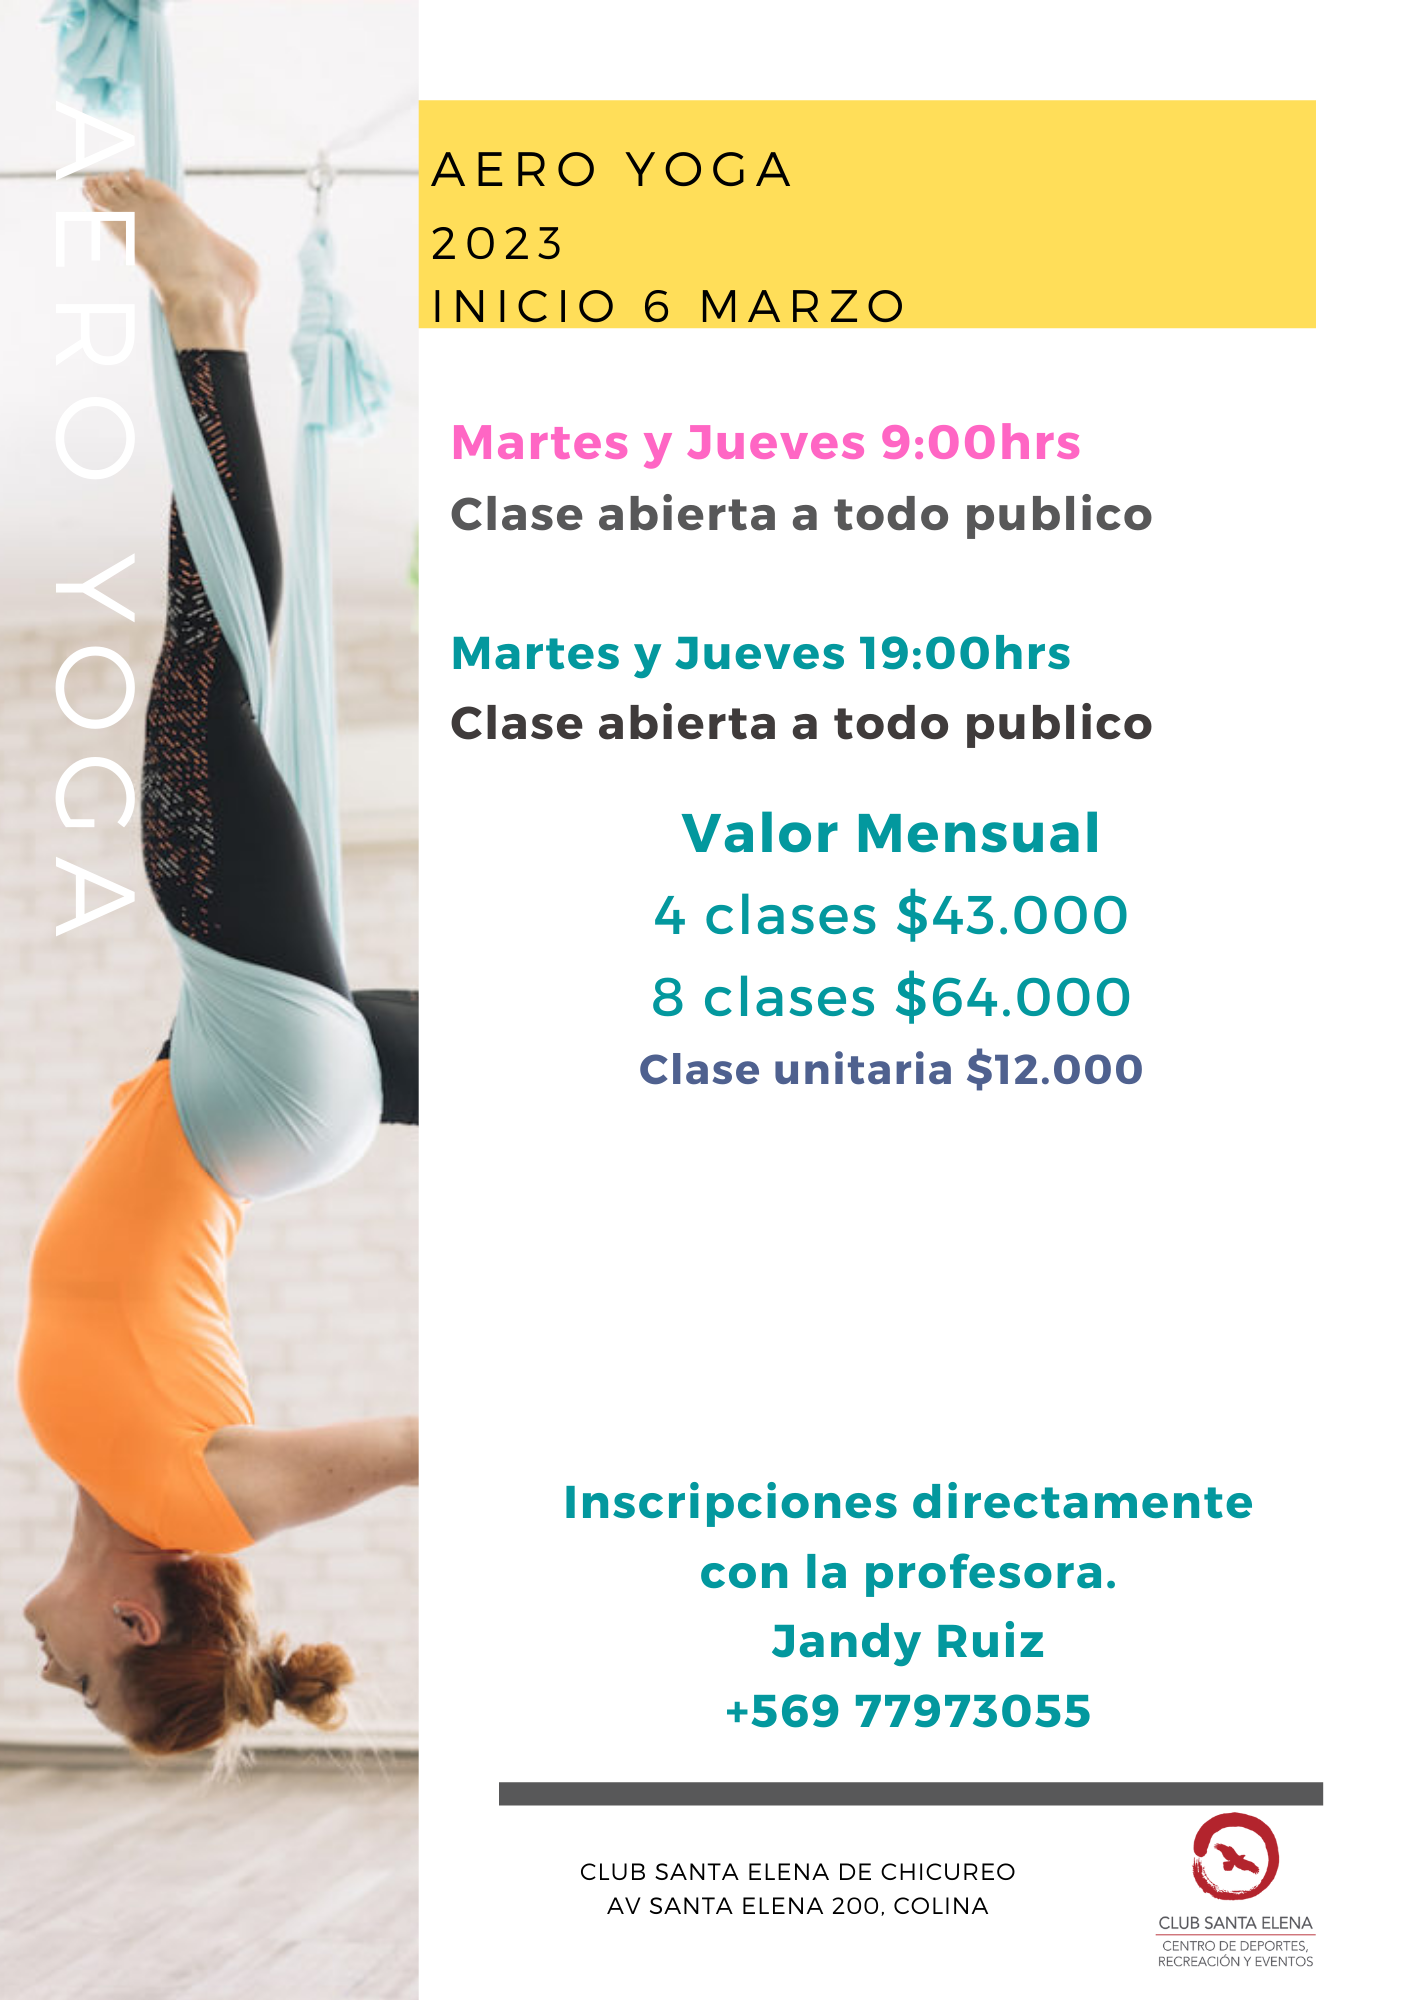 Avant Pilates in Chicureo, RM, CL